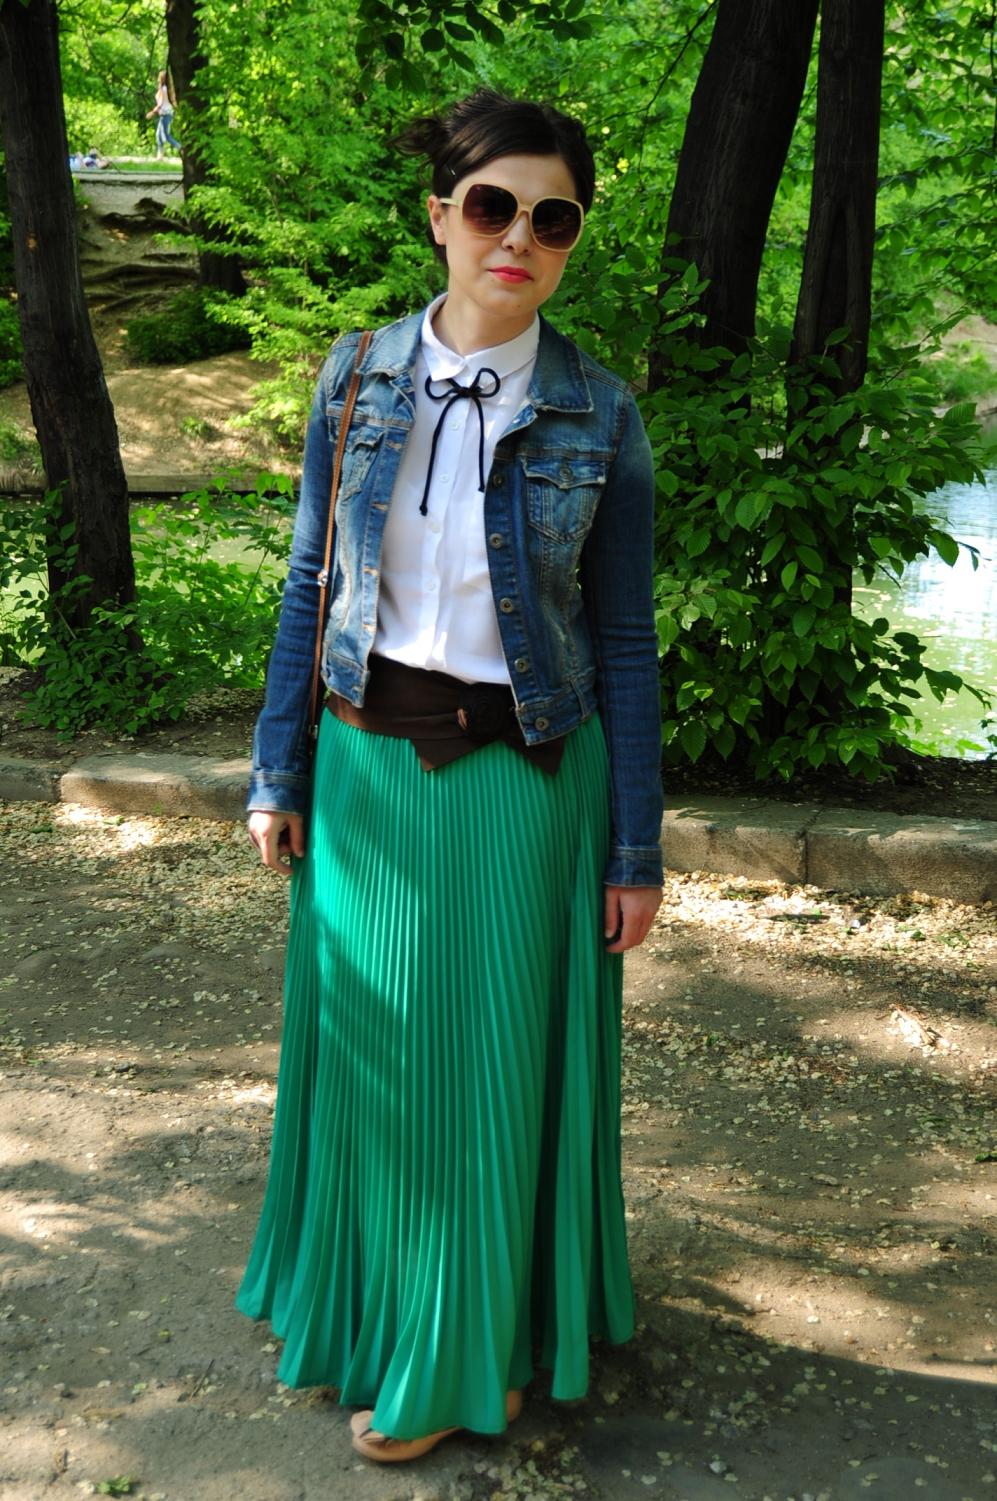 Miss Green has a new home: Long pleated skirt